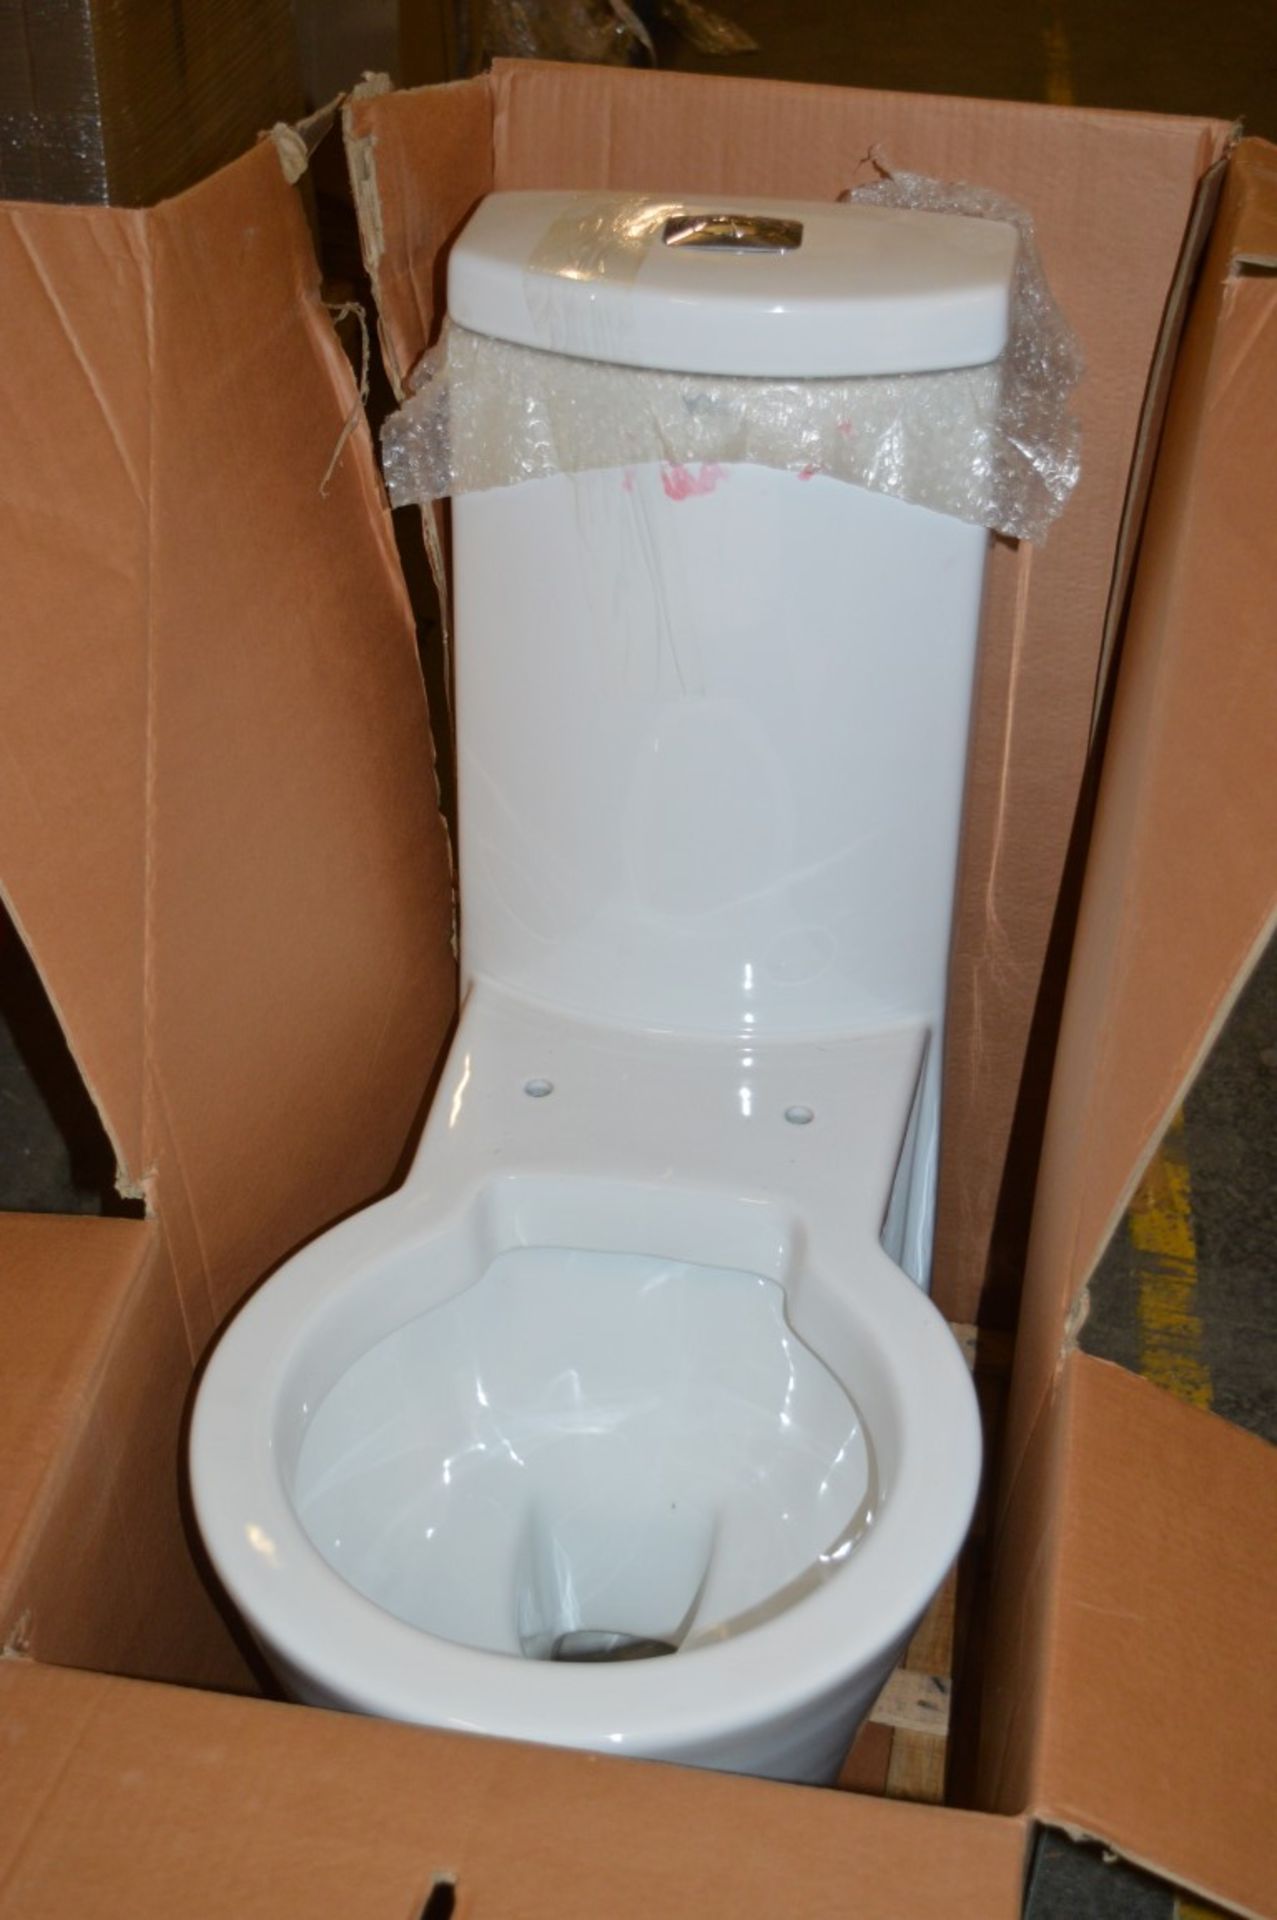 1 x Vogue Bathrooms DECO One Piece Toilet Pan and Cistern - Contemporary White Ceramic Bathroom - Image 3 of 4